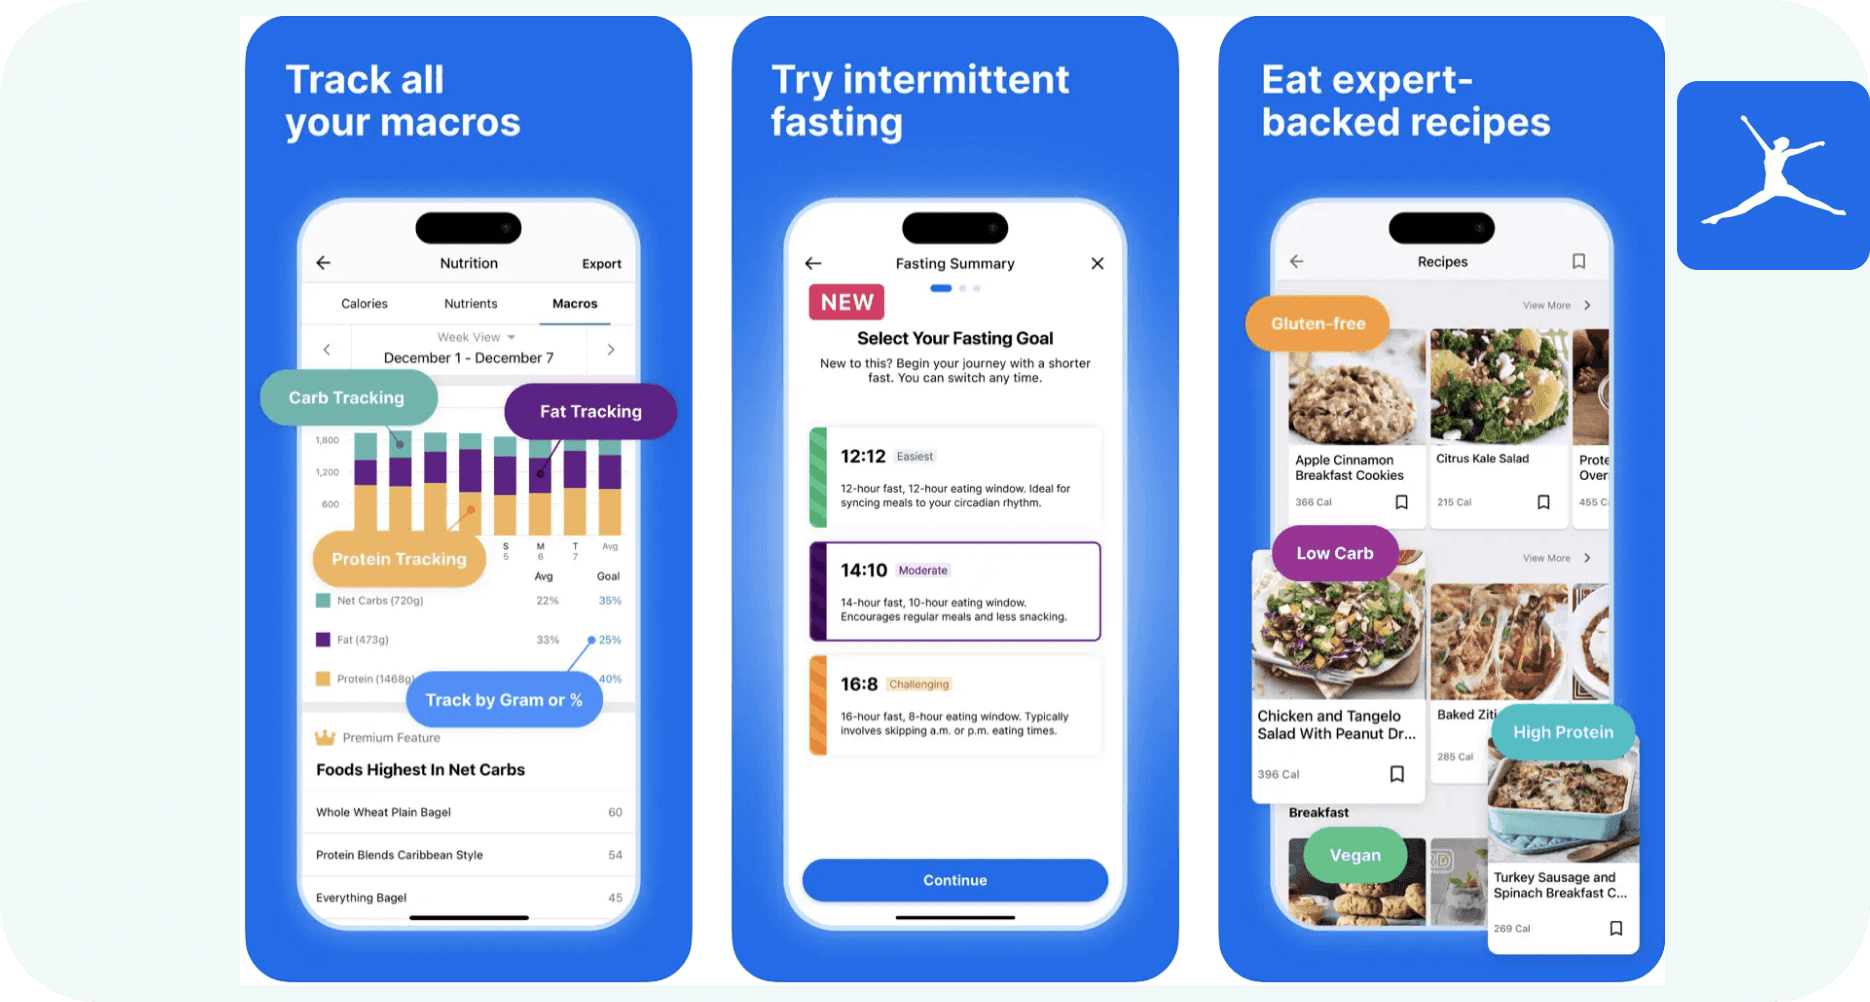 App screenshots from AppStore for Myfitnesspal featuring self improvement features